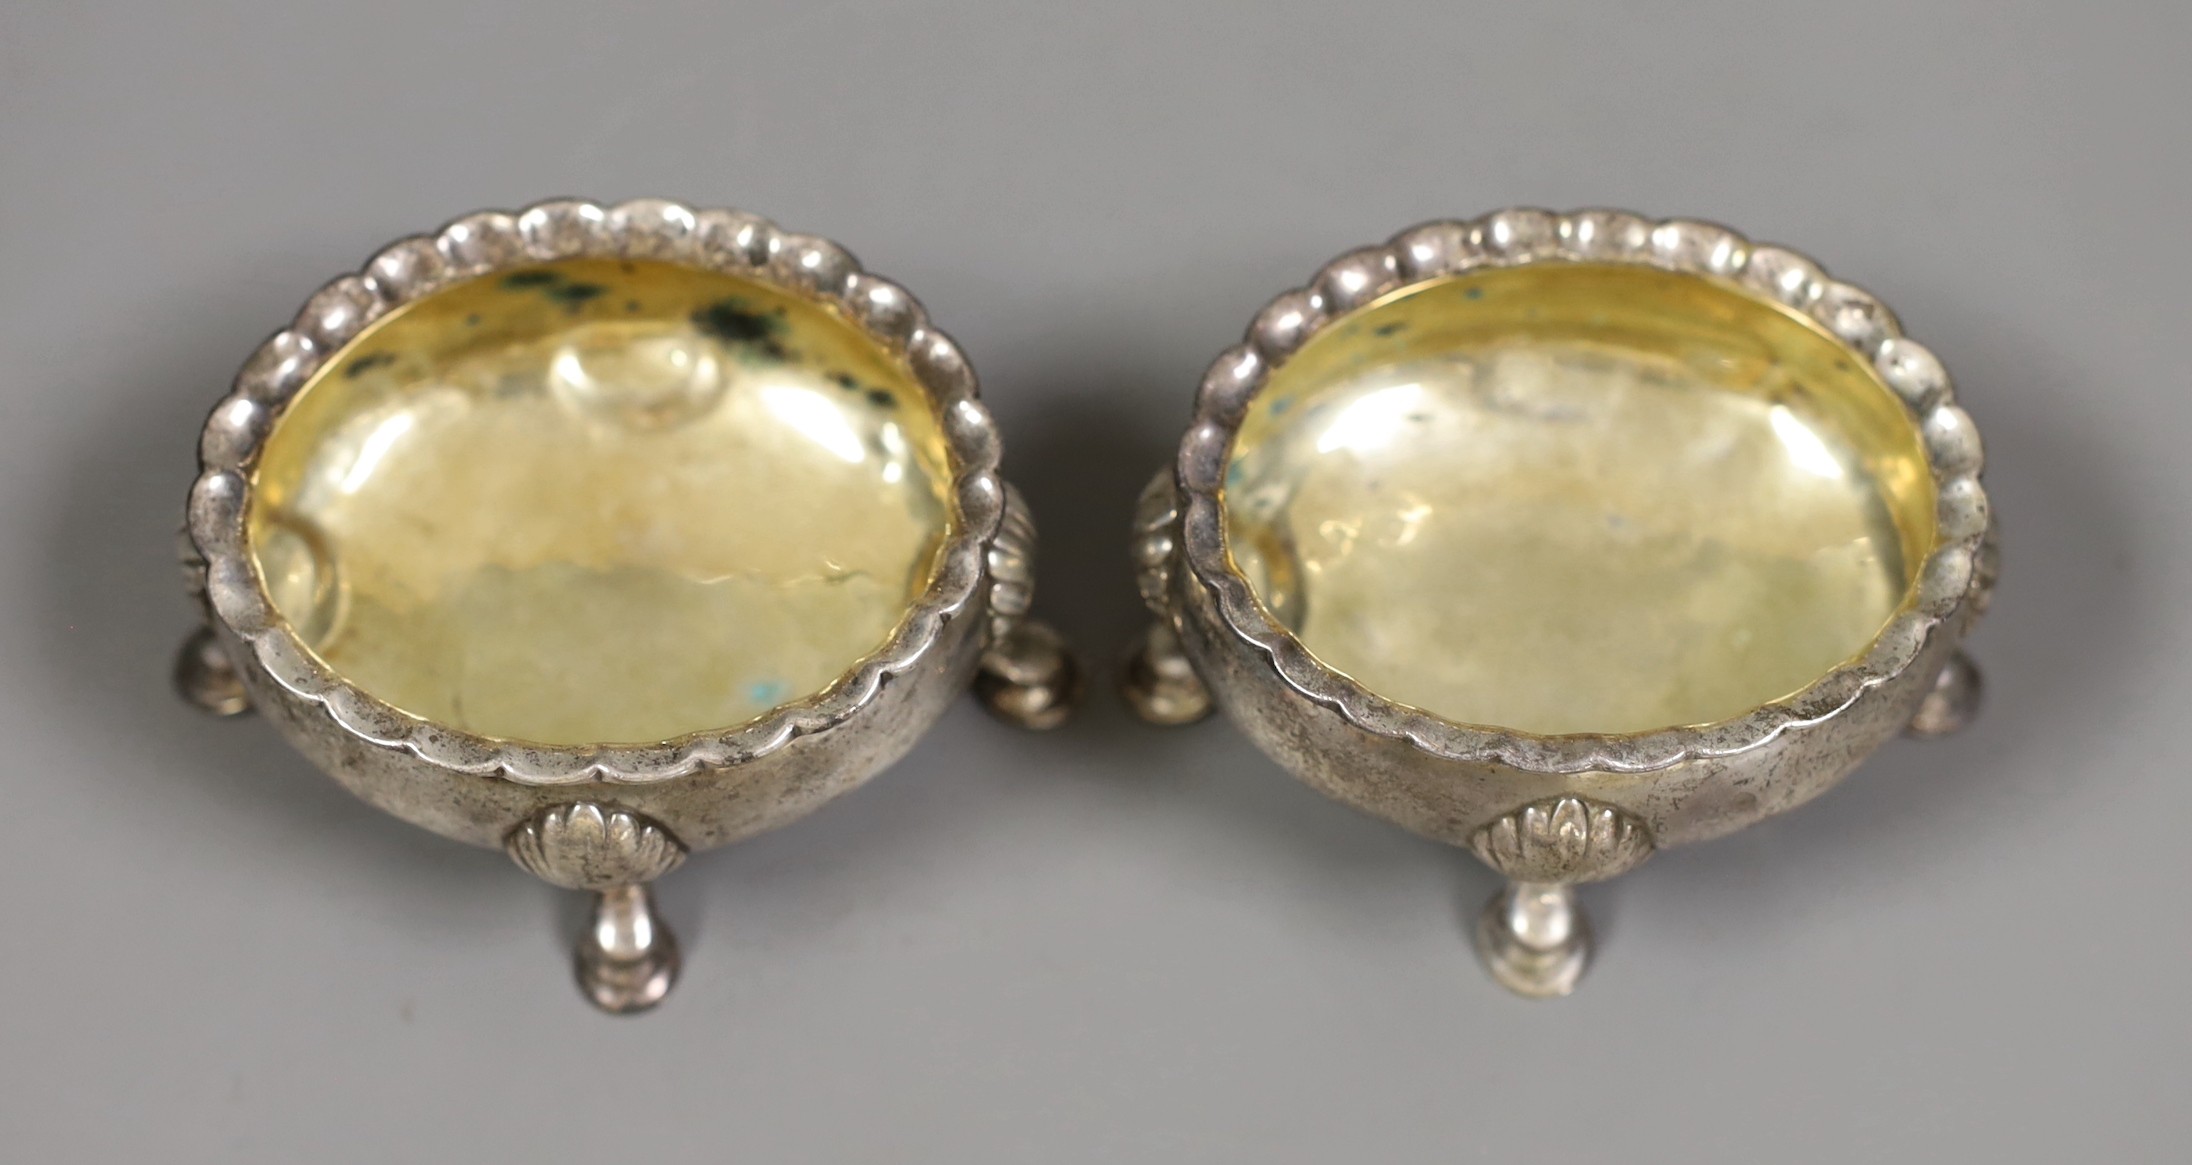 A near pair of mid 18th century silver salts, London 1746 and 1762, 6oz